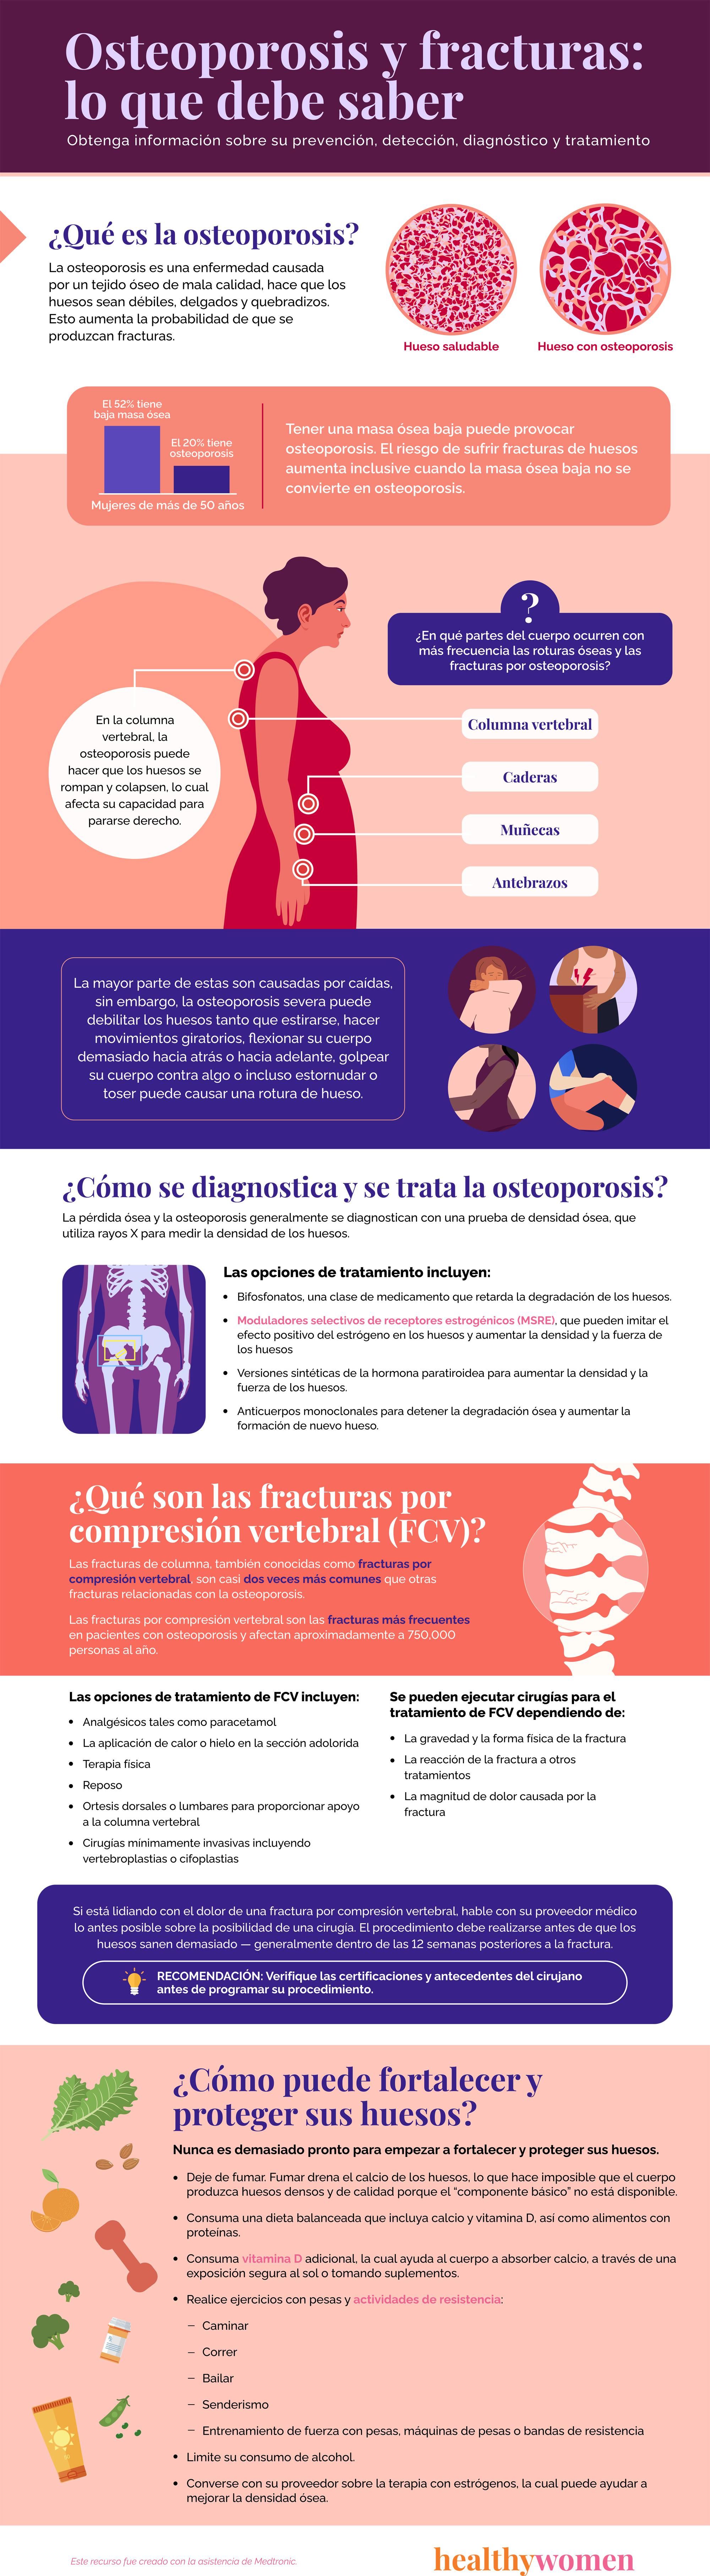 Infographic Osteoporosis y fracturas: lo que debe saber. Click the image to open the PDF